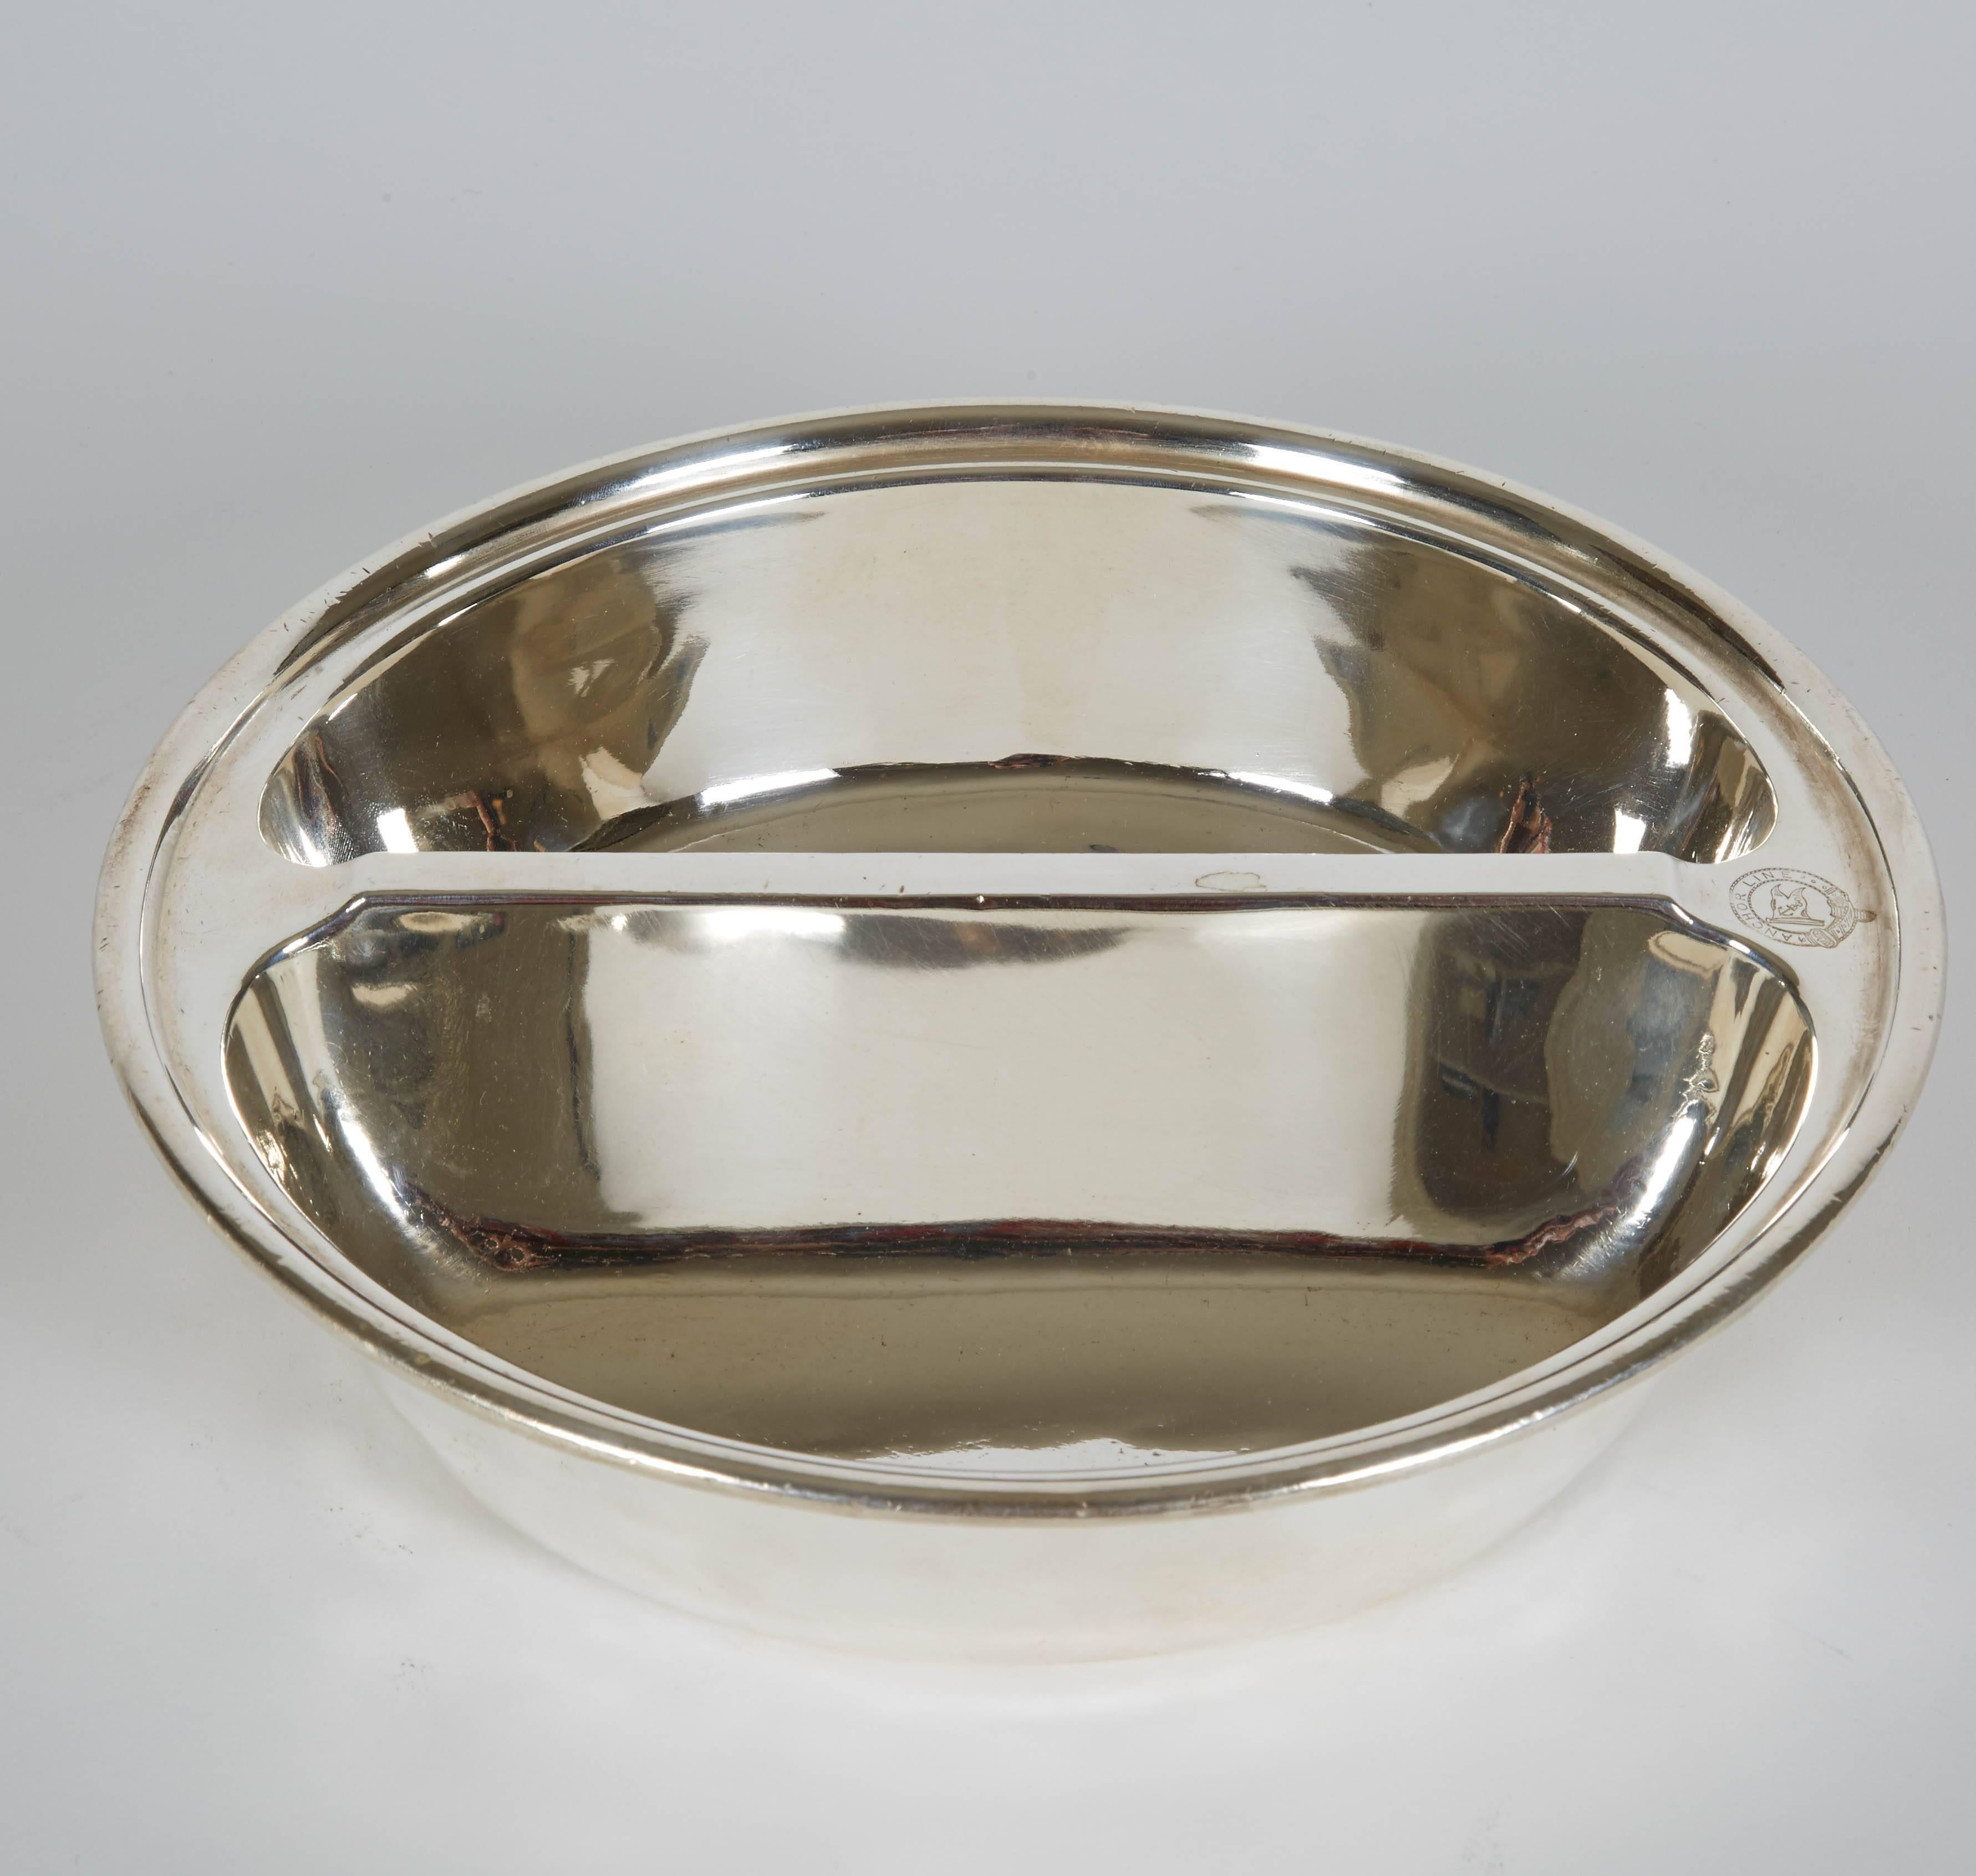 Vintage hotel silver round divided dish from England. It sports the badge of 